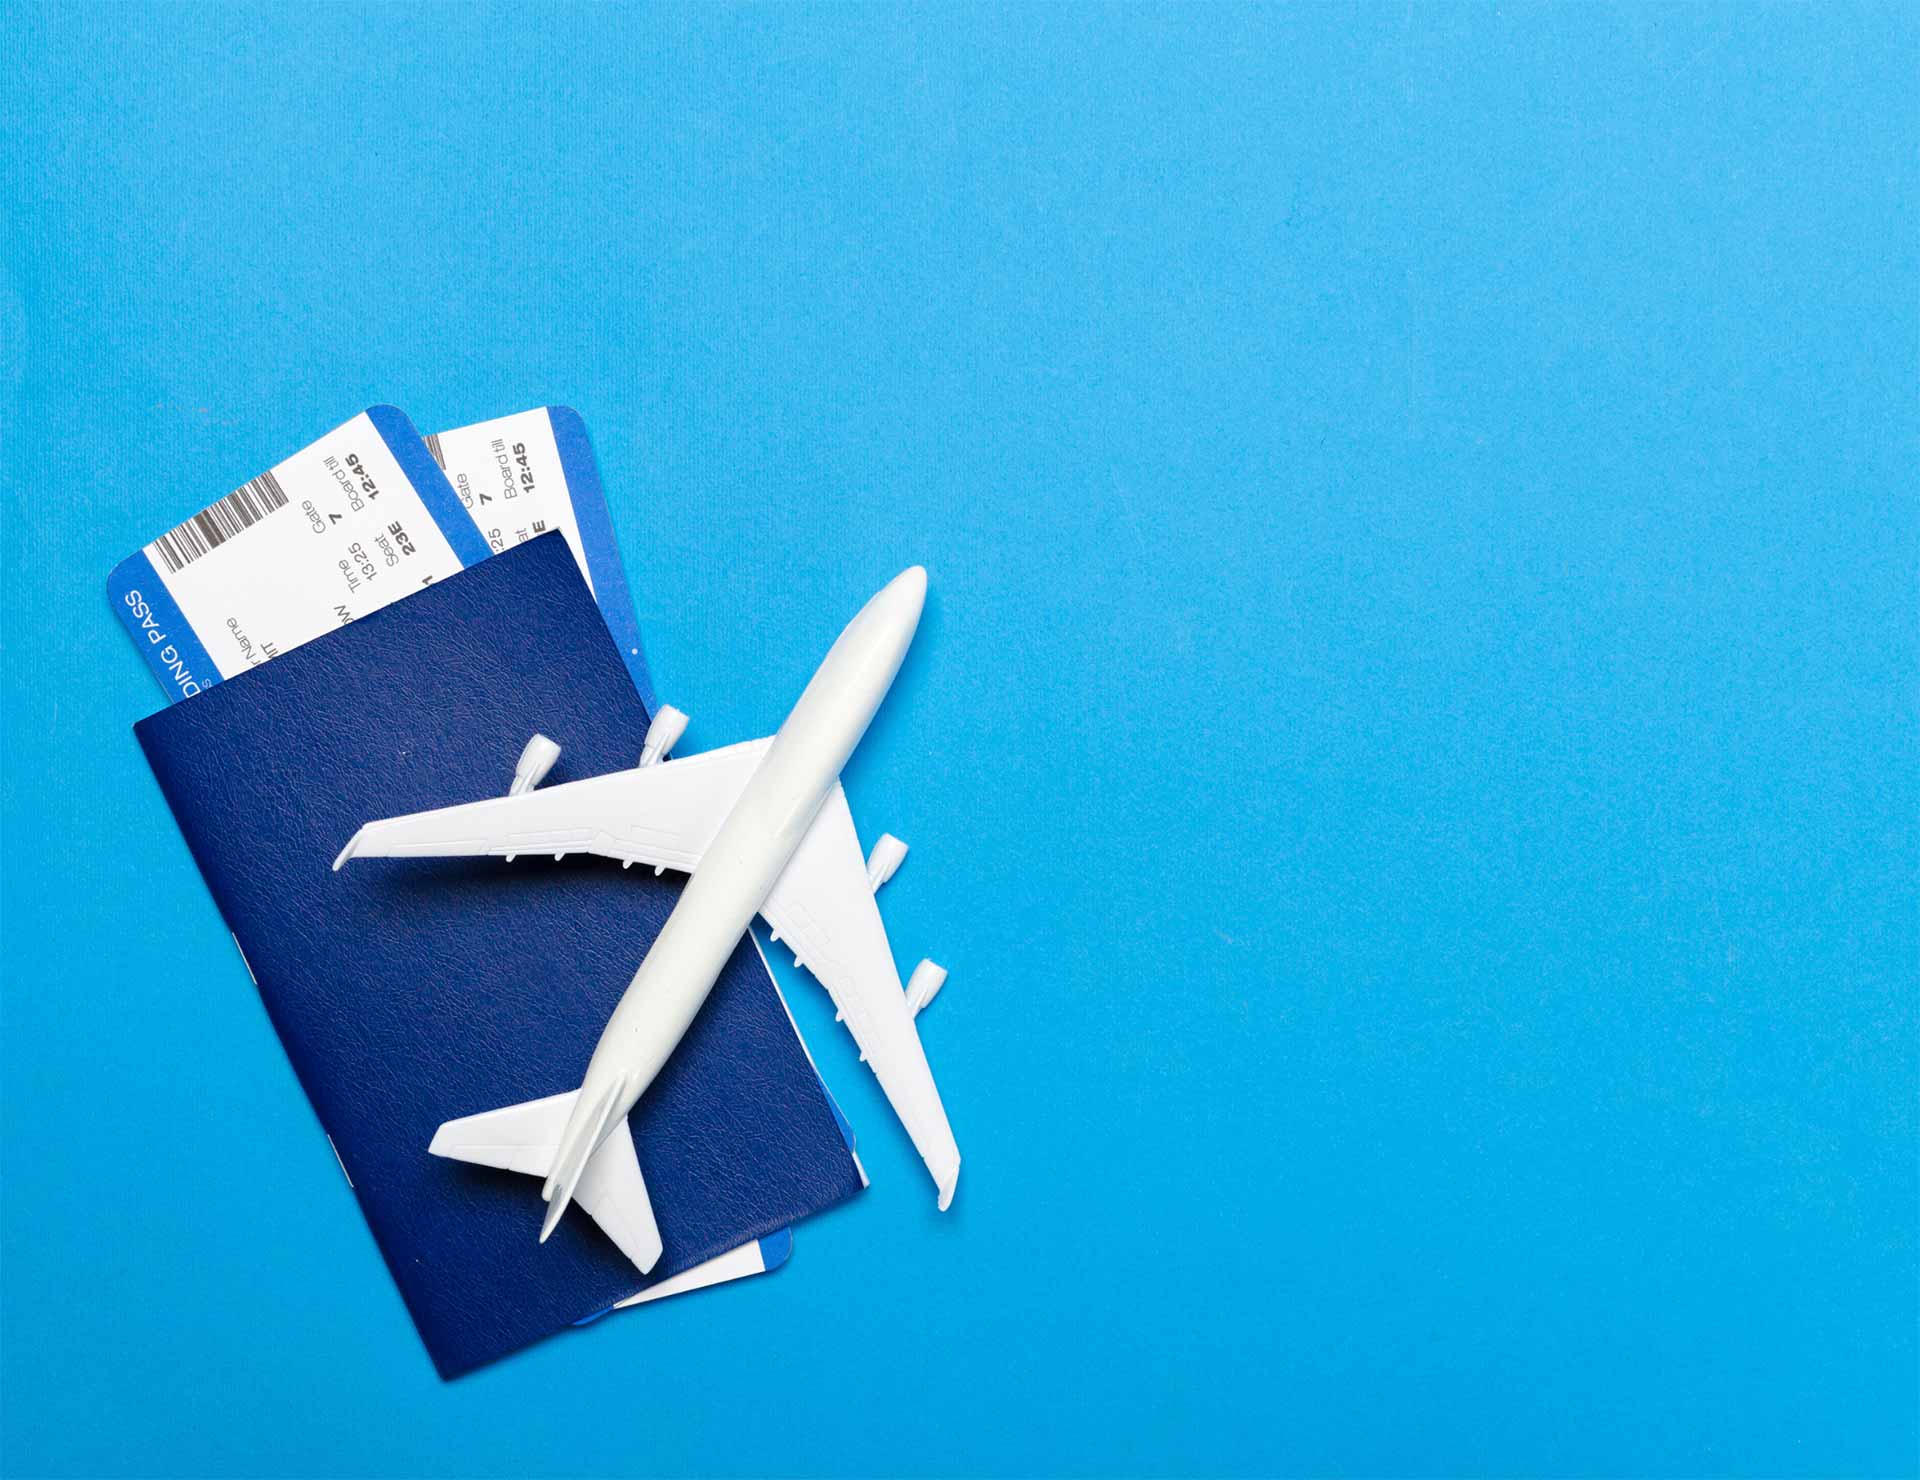 7 Essential Travel Items I Never Leave Home Without